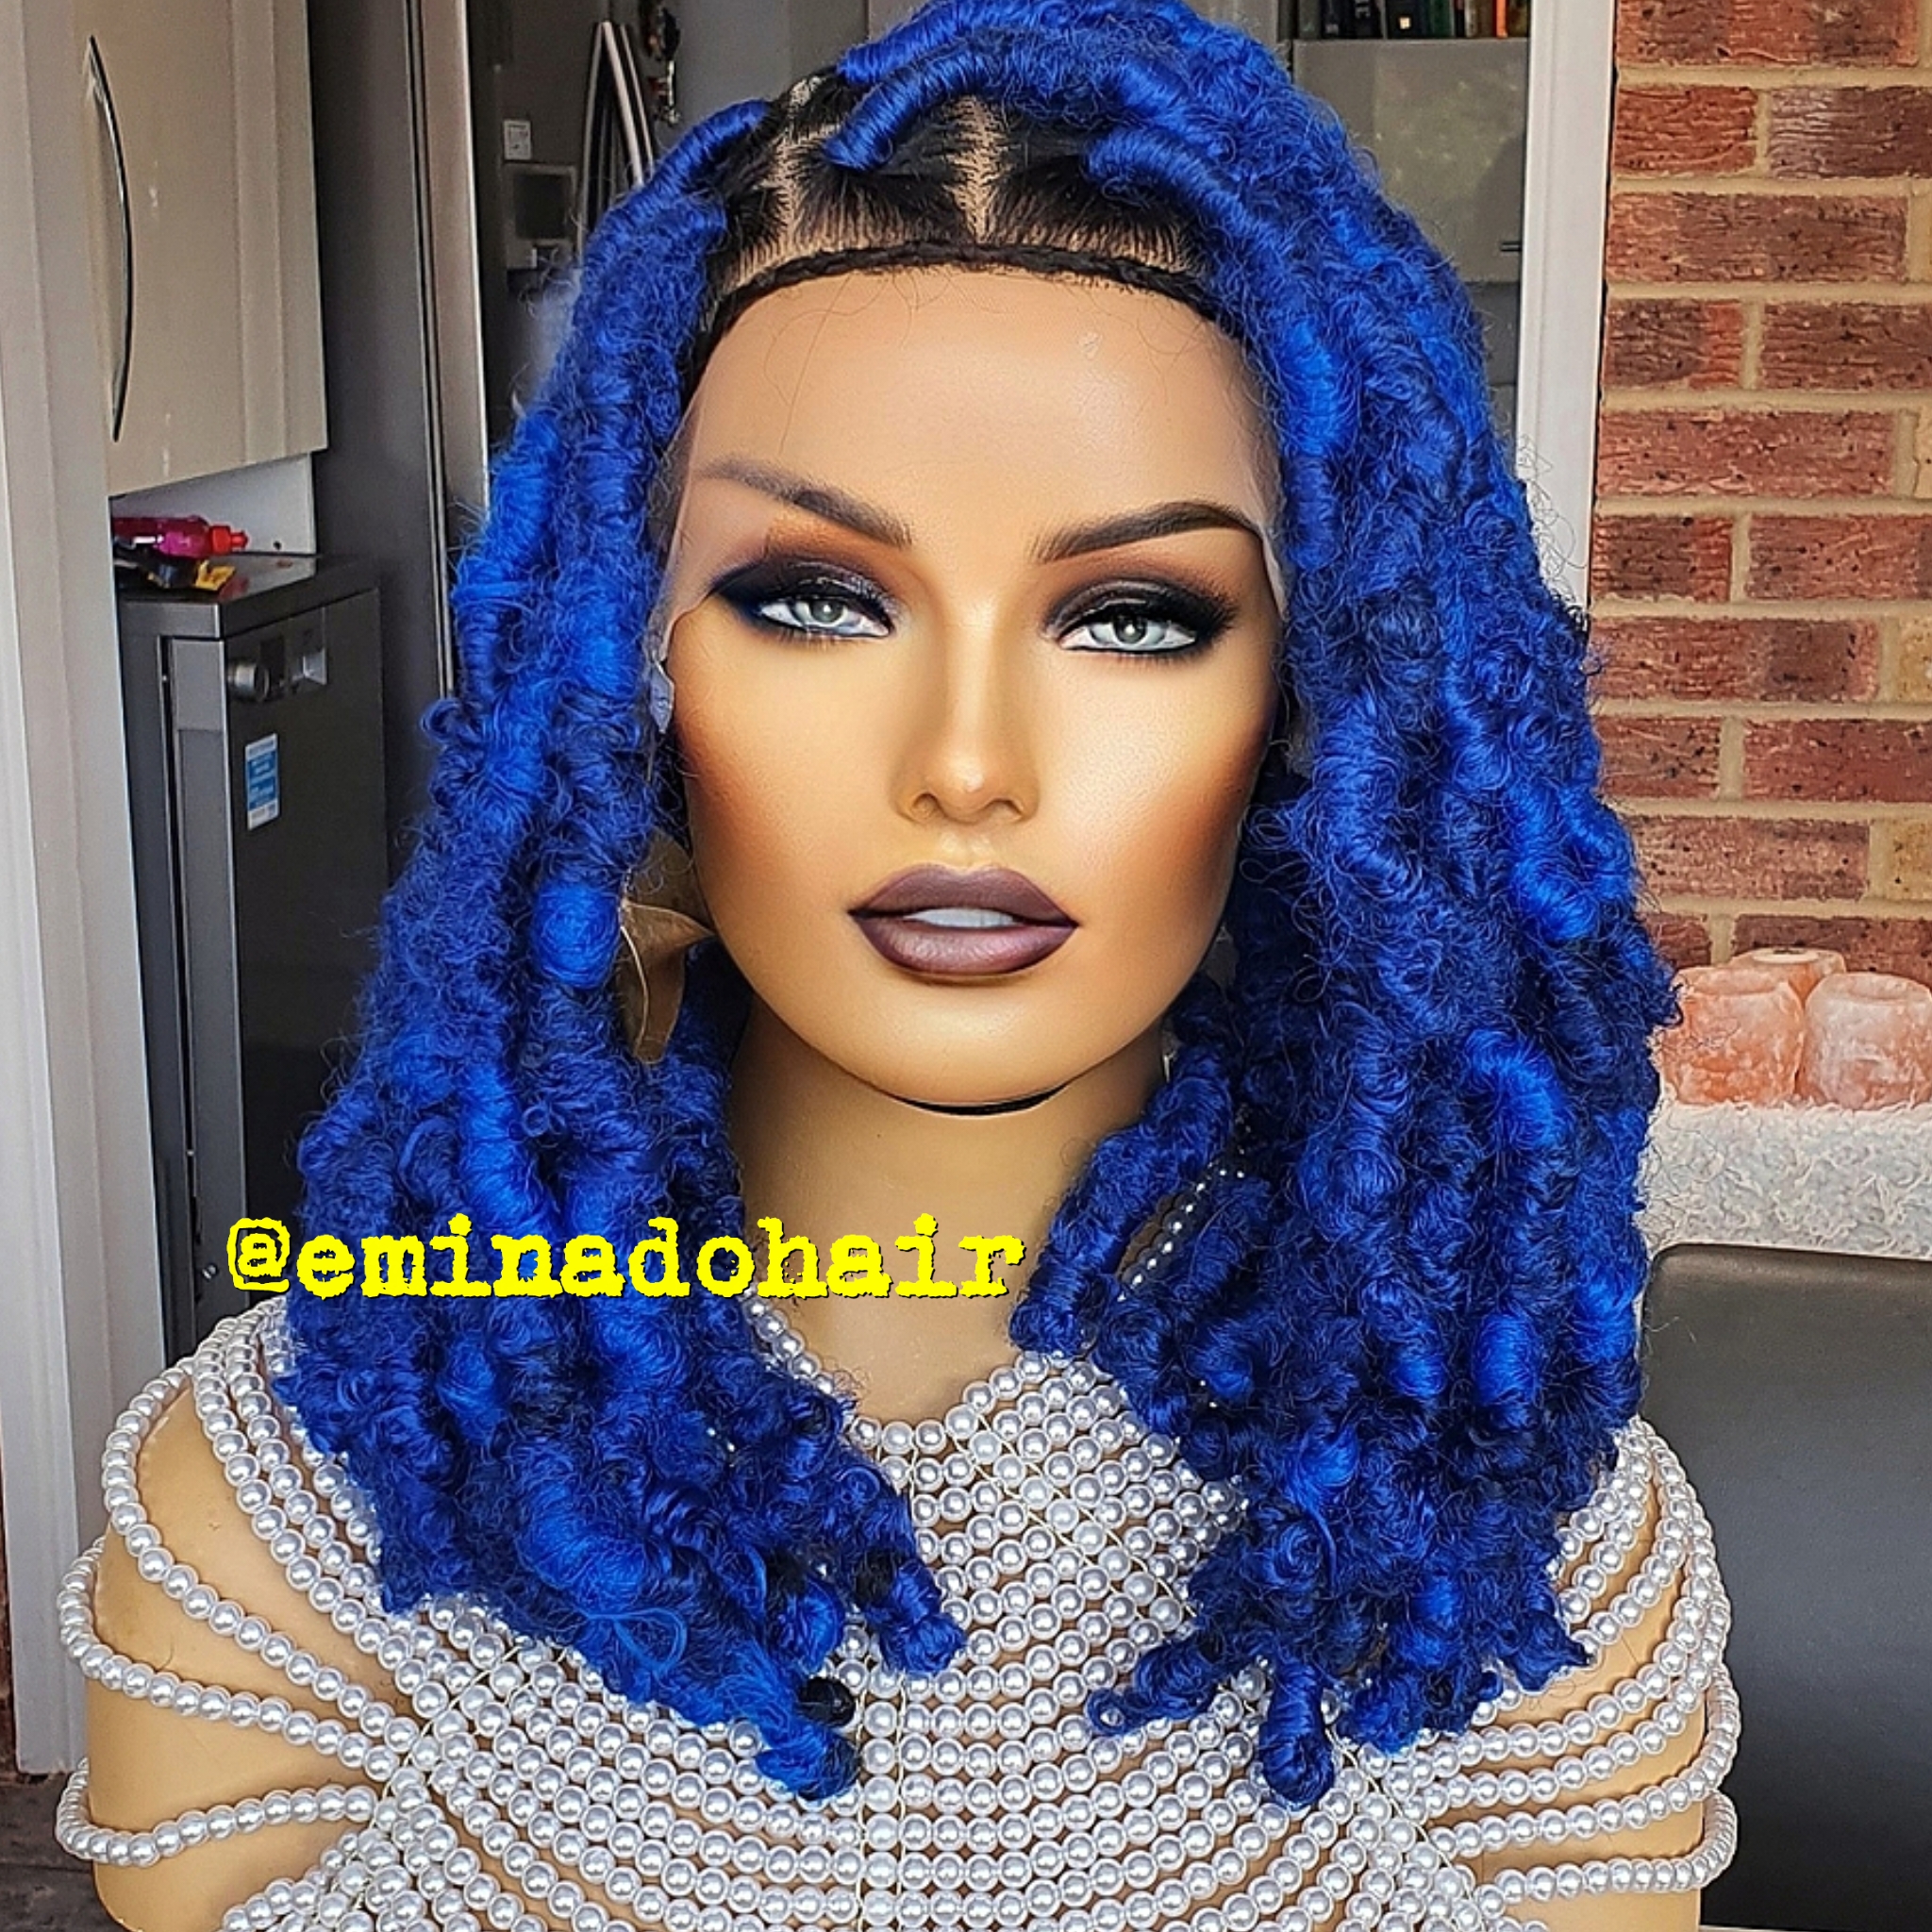 Butterfly locs braided wig, colour blue, Full Lace, Braided Wigs Store UK, Eminado Braided Wigs, Braid Wig, Lace frontal, Full lace, Cornrow, Locs, Twists